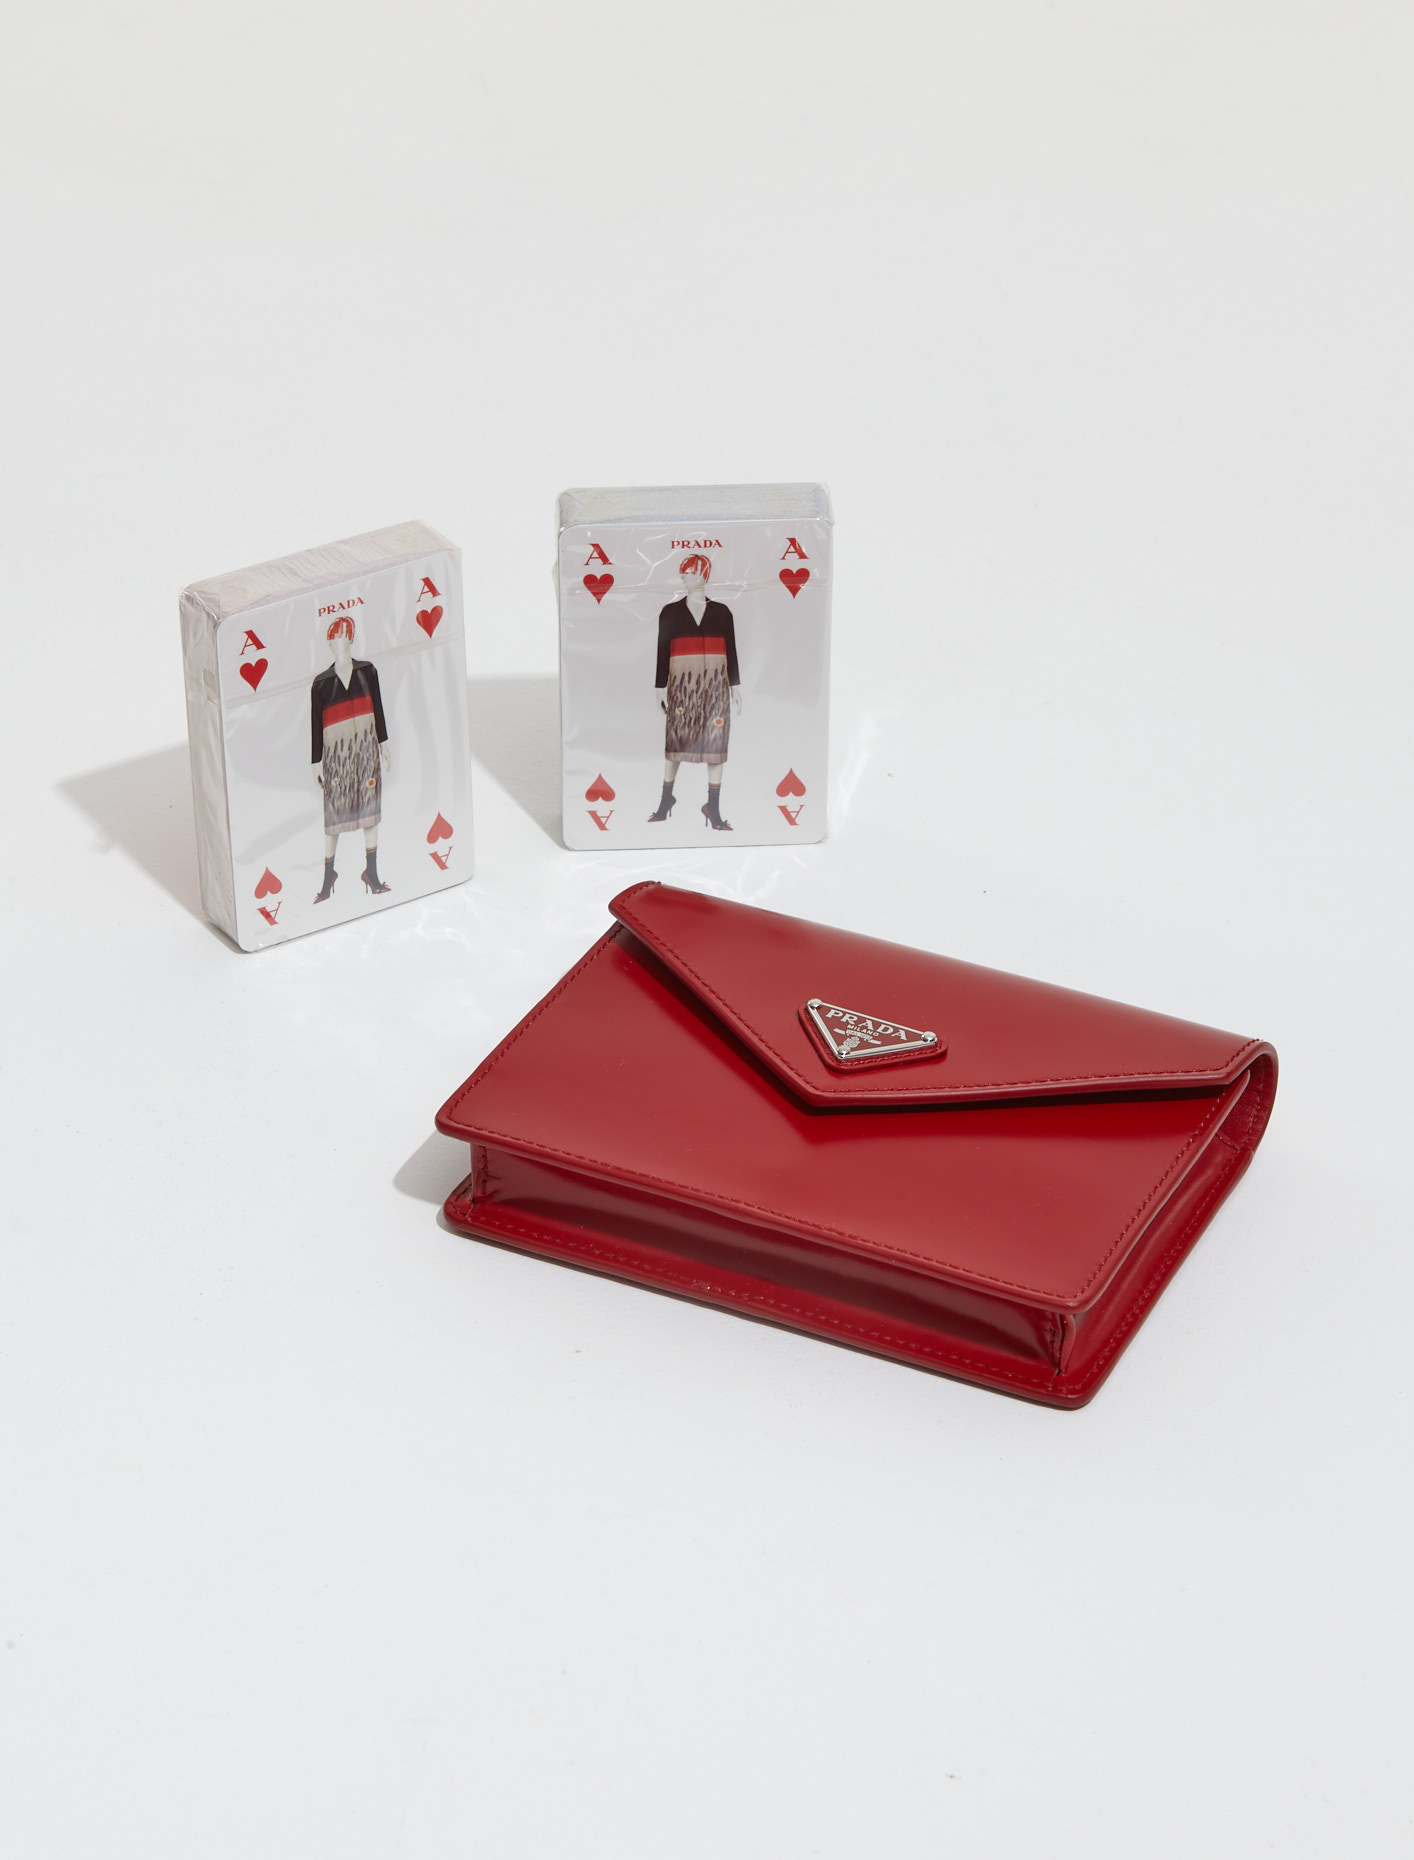 Prada Playing Cards with Leather Case | Voo Store Berlin | Worldwide  Shipping